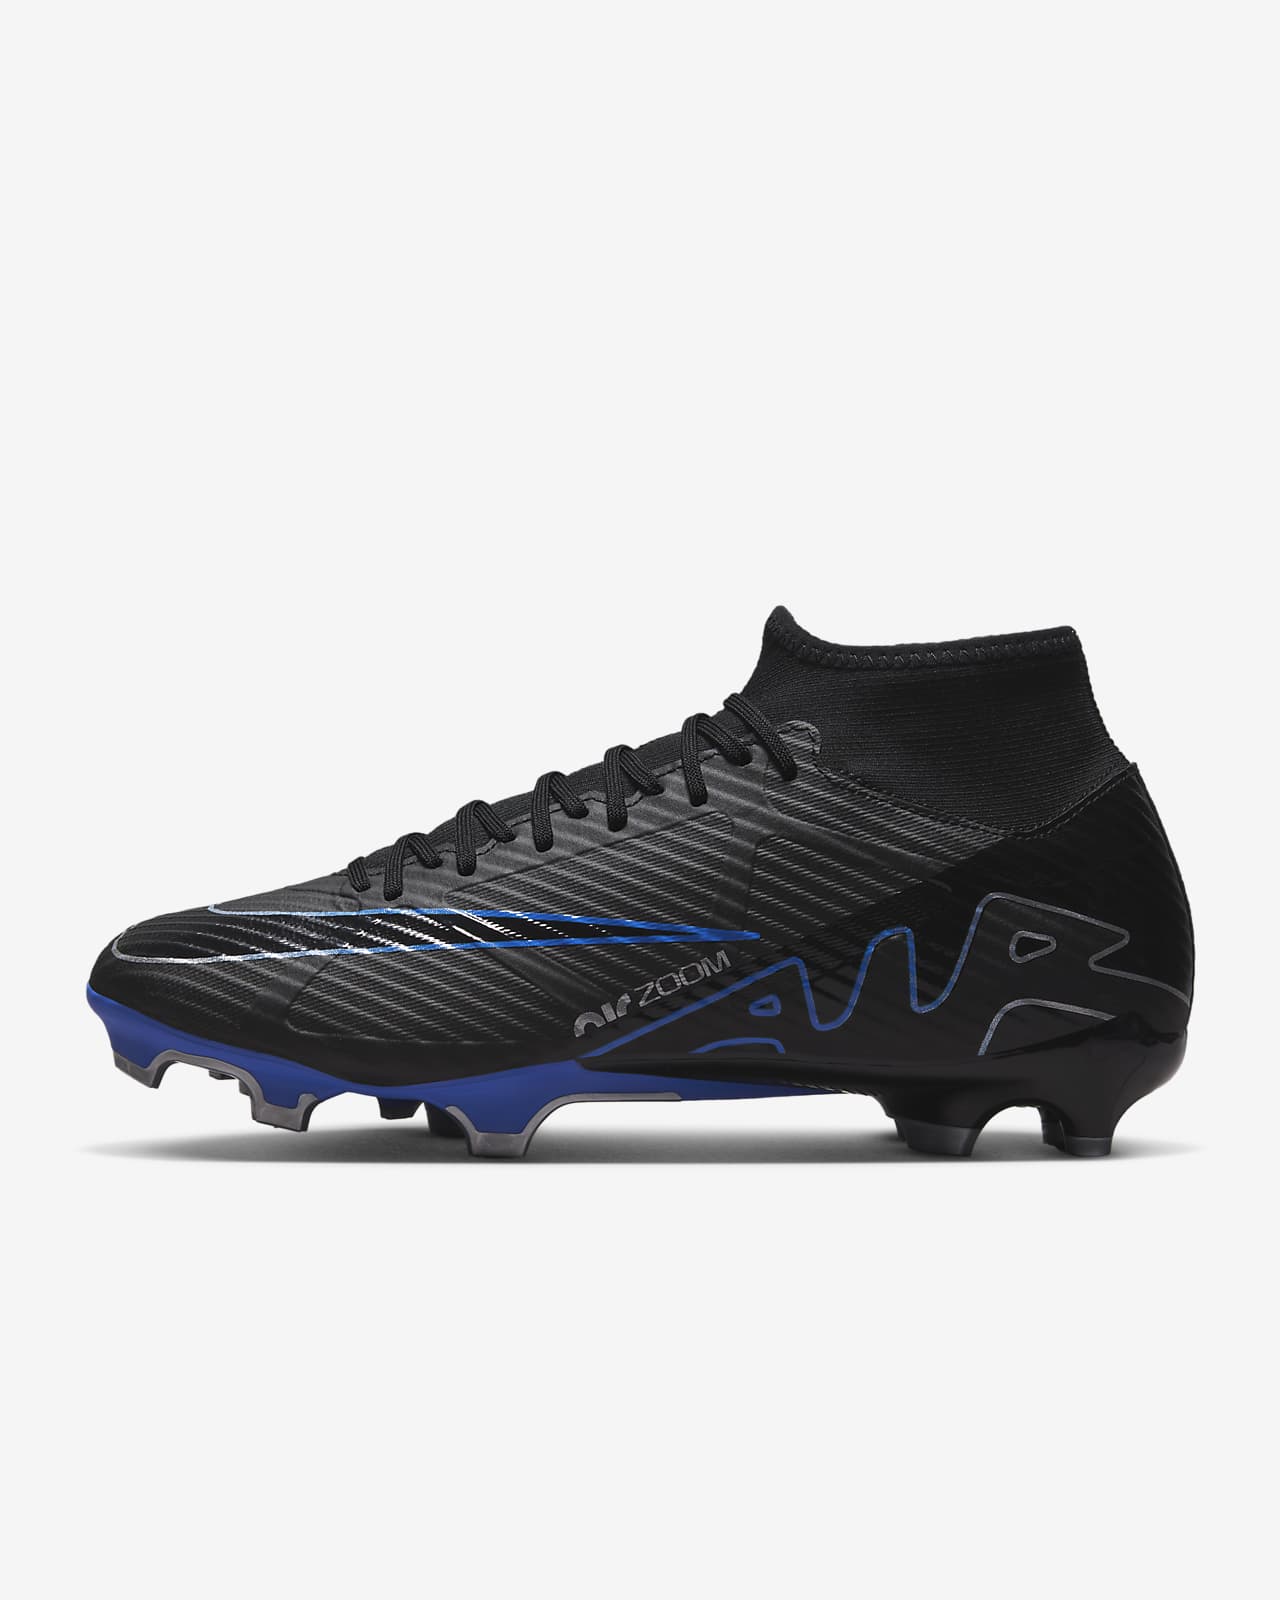 Chaussure de foot à crampons montante multi-surfaces Nike Mercurial Superfly 9 Academy. Nike FR